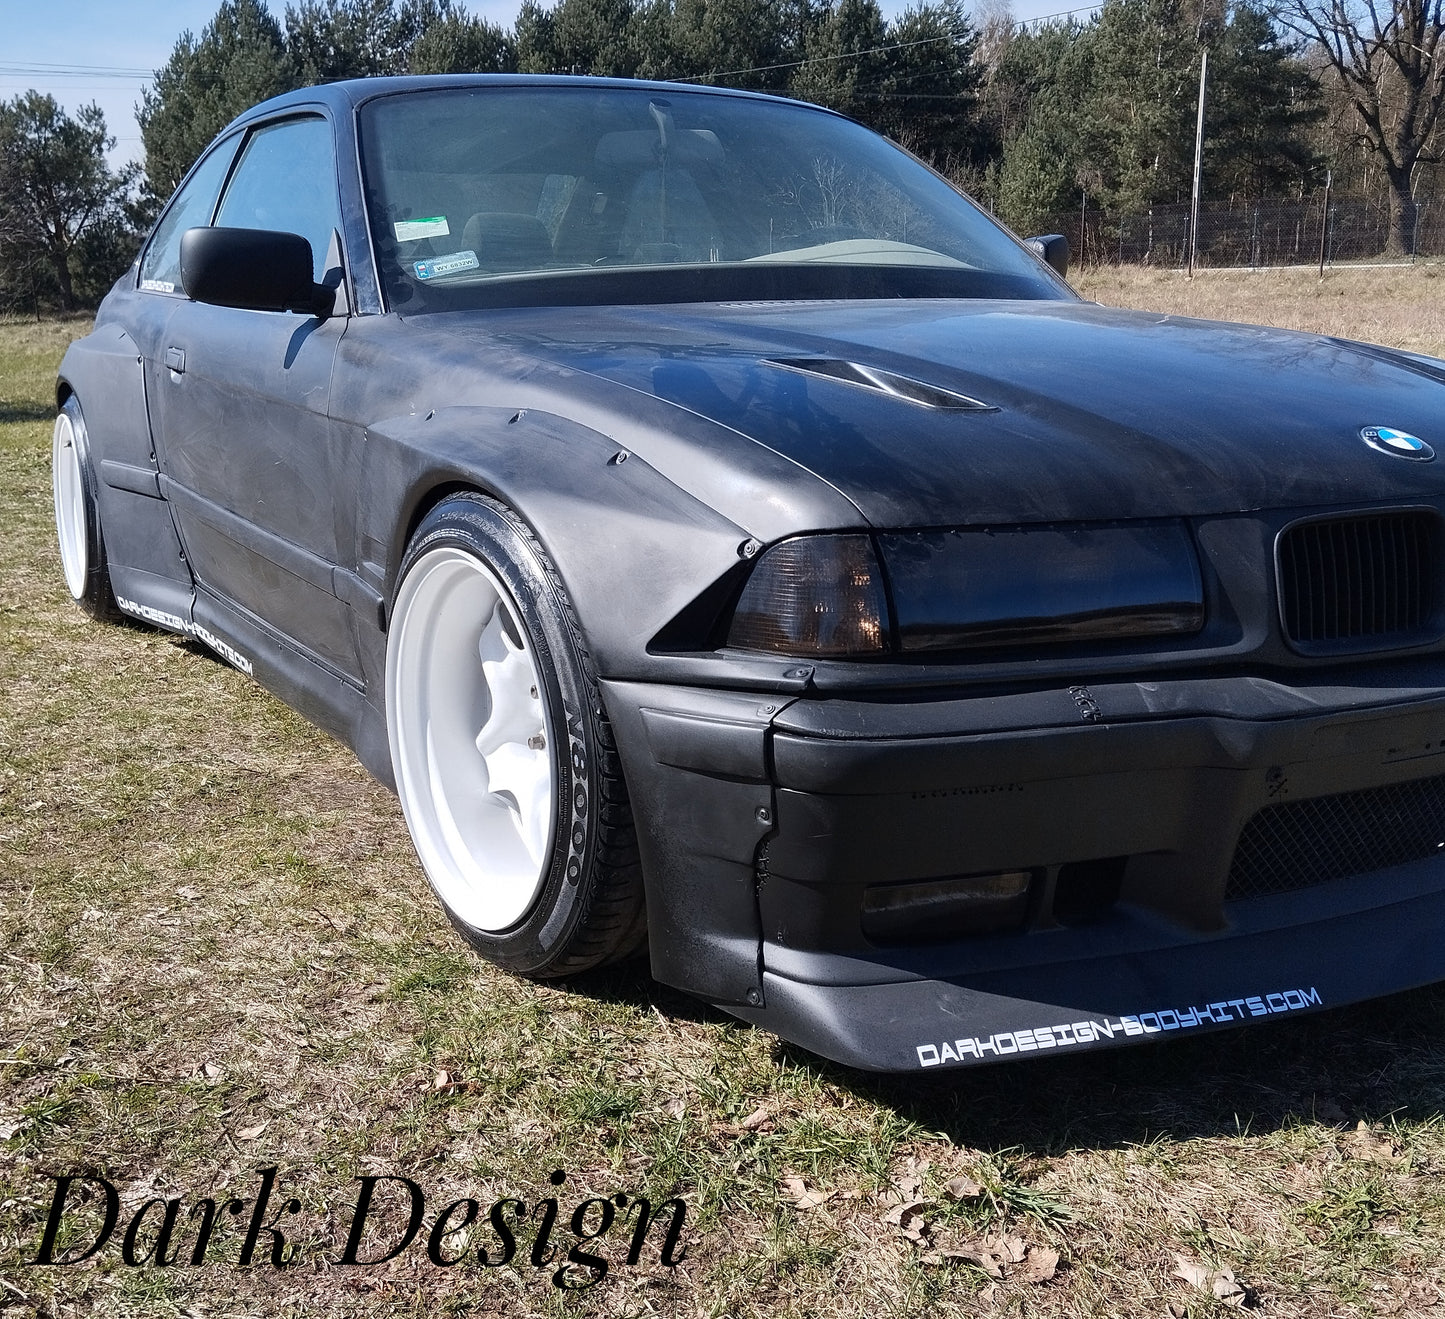 BMW E36 COUPE/CABRIO NOT PANDEM DARK DESIGN STYLE FULL WIDE BODY FENDERS ARCHES